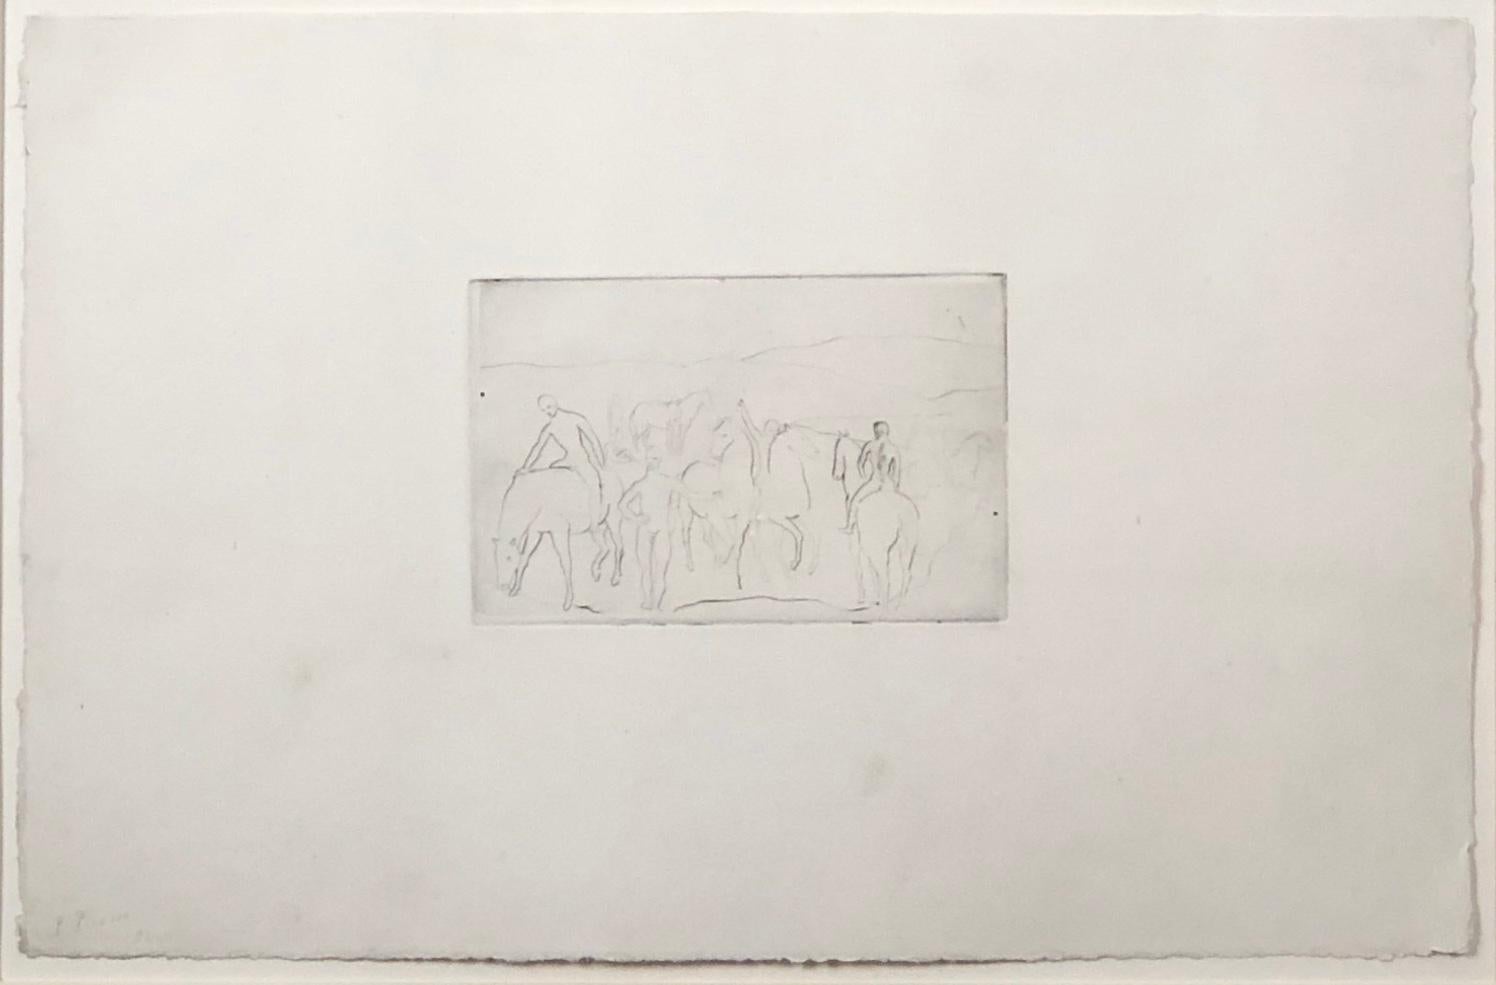 This piece is an original drypoint created by Pablo Picasso in 1905 and printed by Ambroise Vollard after steel-facing in 1913. It is from a series entitled La Suite des Saltimbanques, which is comprised of 14 pieces by Picasso created for Vollard. 